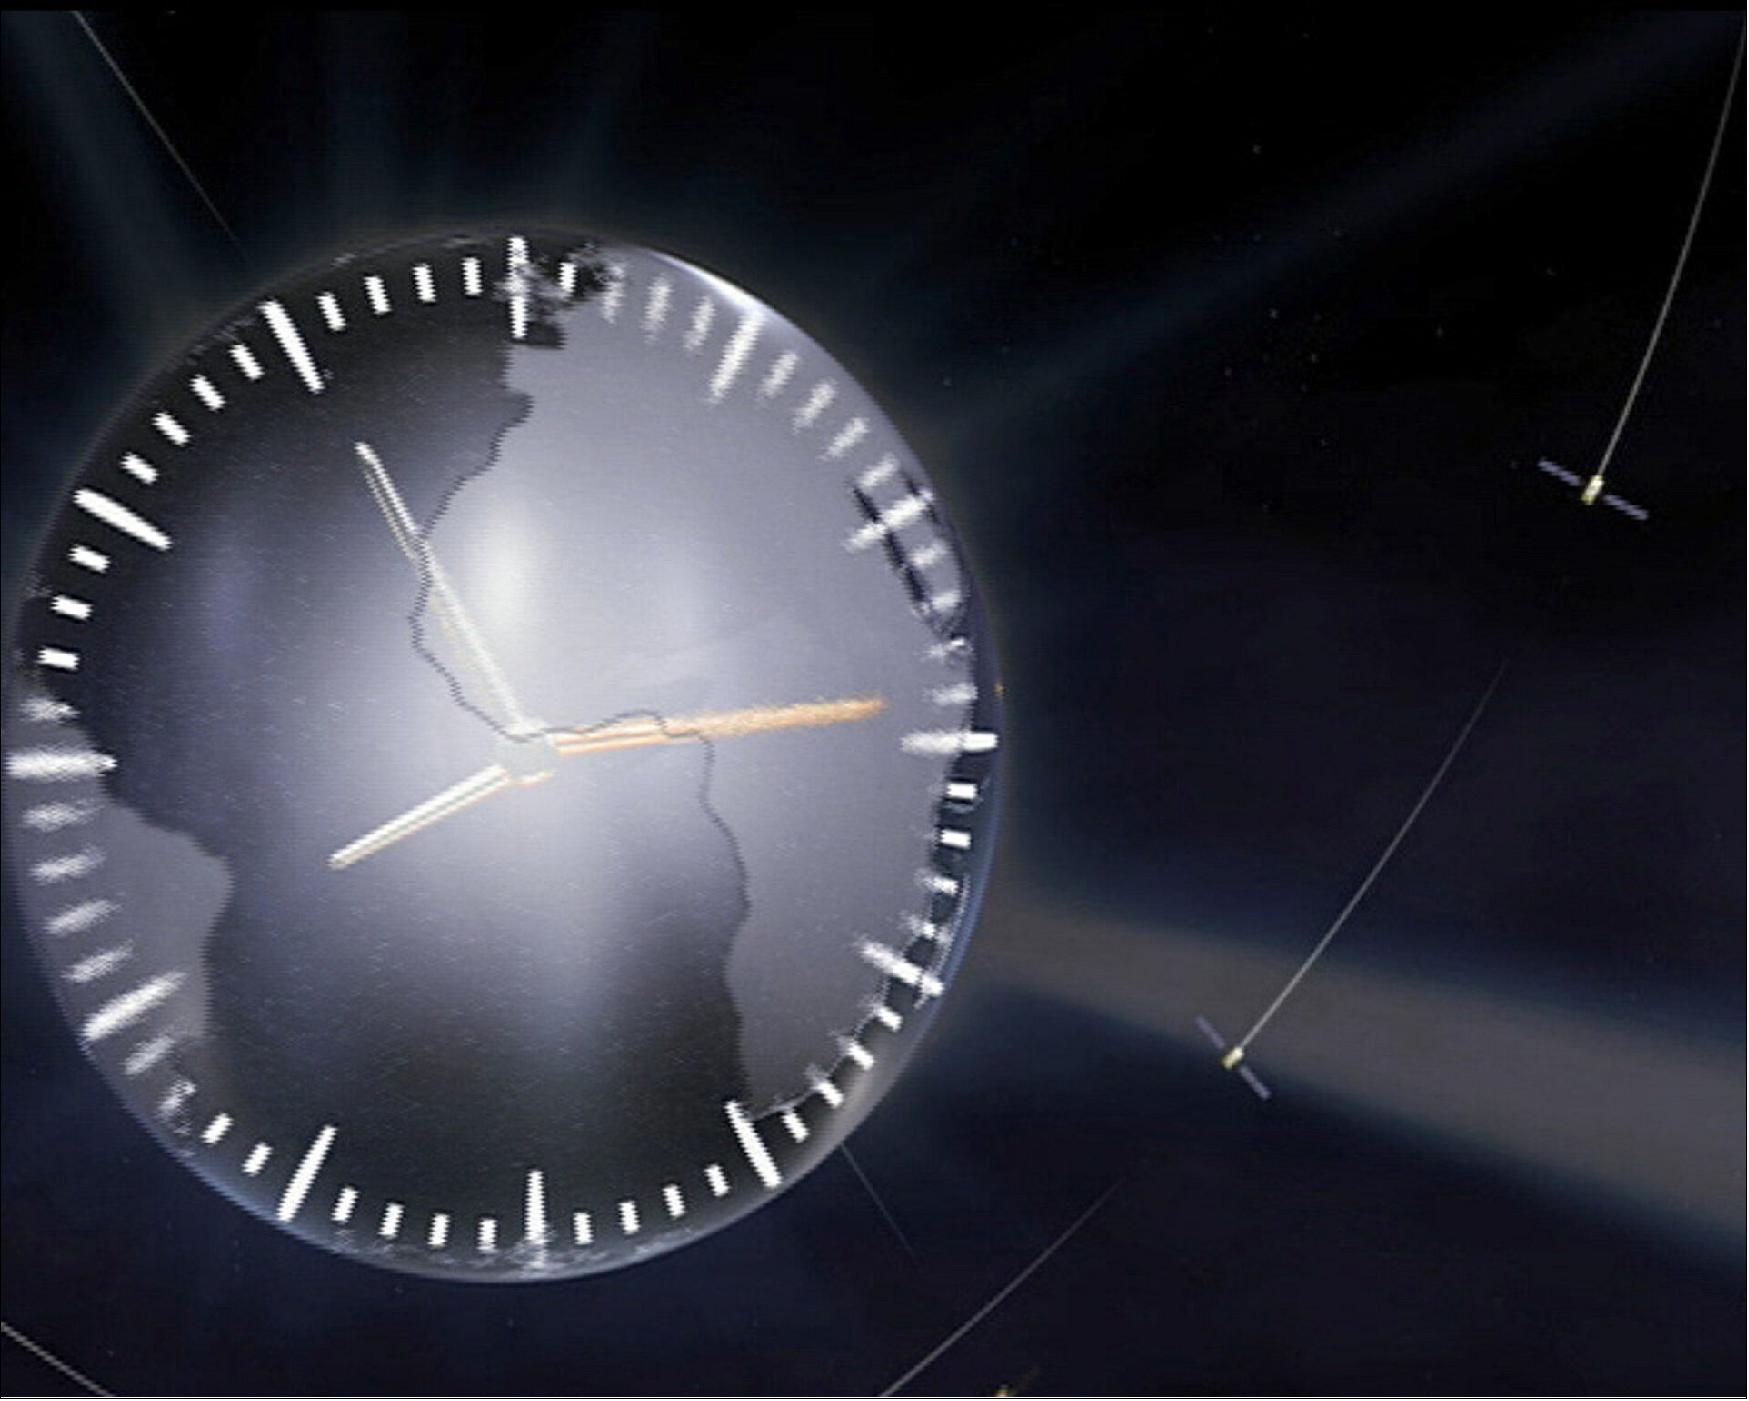 Figure 5: Galileo time. With its orbiting atomic clocks kept synchronised by a worldwide ground network, the Galileo constellation is like a single planet-sized clock. With satellite navigation based on ranging – how long does it take for a signal to reach the receiver? – accurate time measurements down to a billionth of a second are essential for precise position fixes (image credit: ESA)